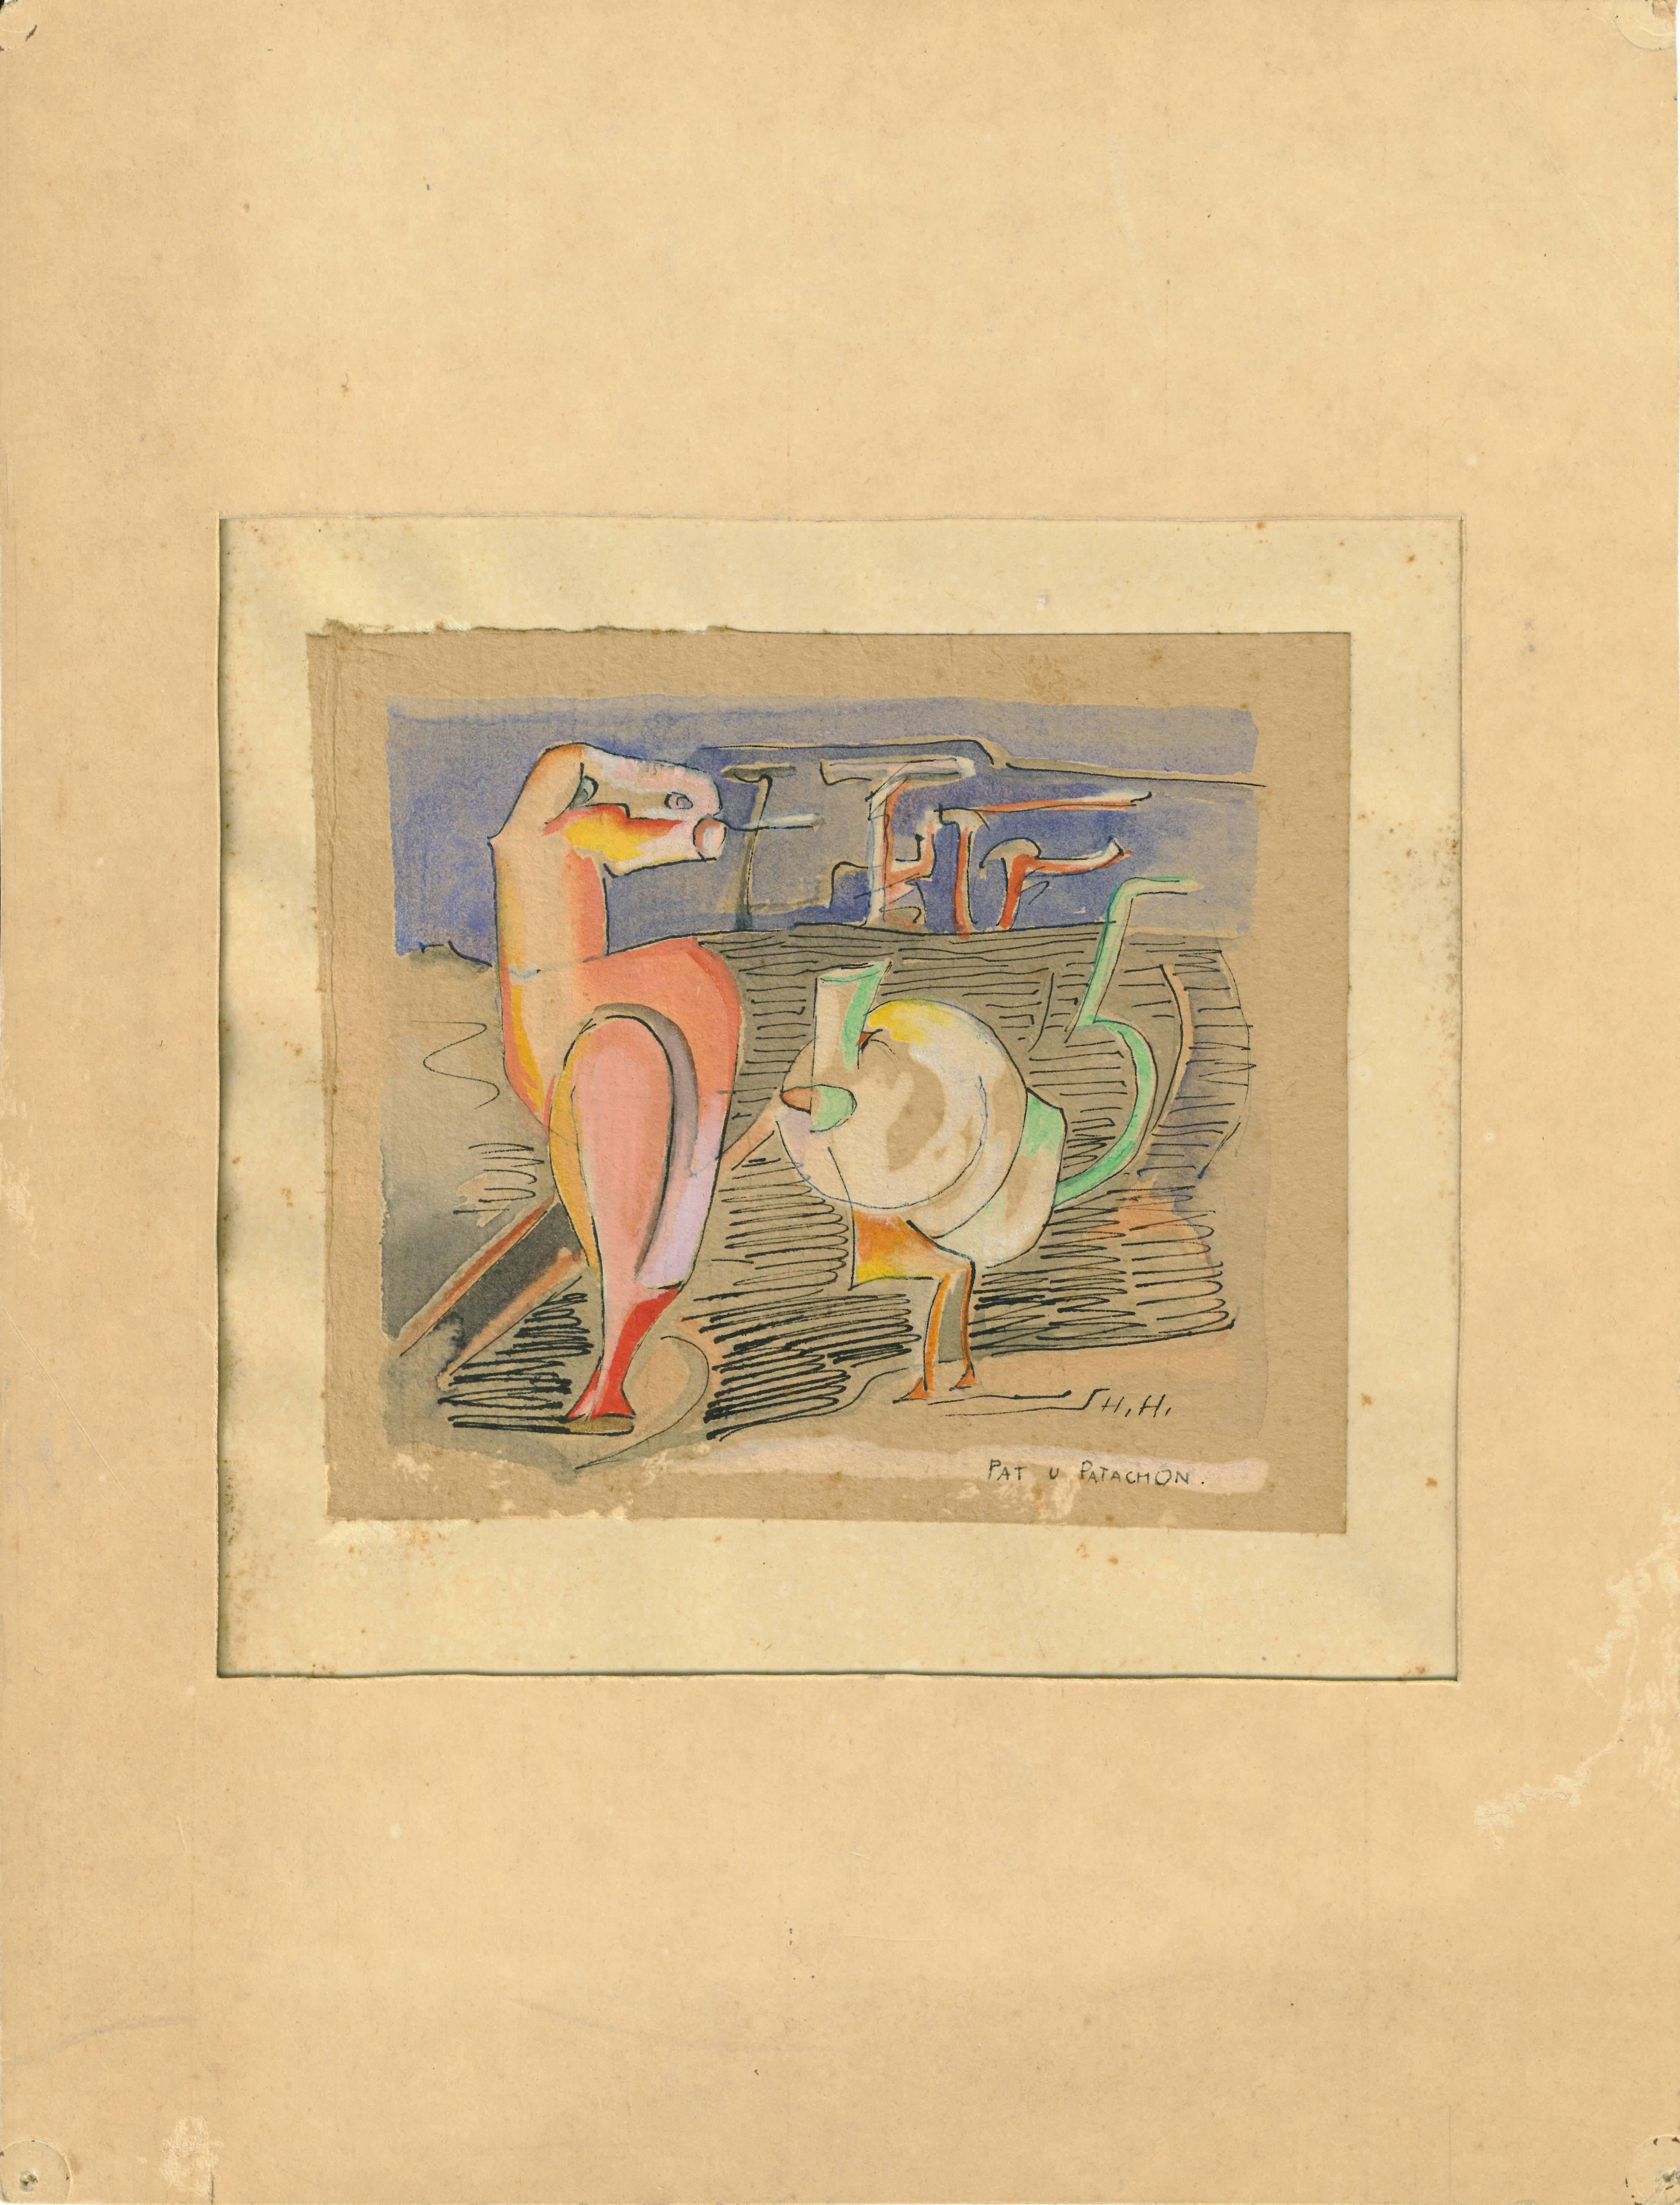 Hannah Höch (Gotha 1889 - Berlin 1978), watercolor with ink on paper, titled 'Pat u Patachon', 1920s signed 'H.H.'. Measures: 11.5 x 10.2 cm.

This wonderful watercolor was painted by Dada artist Hannah Höch. The title refers to the Danish comical